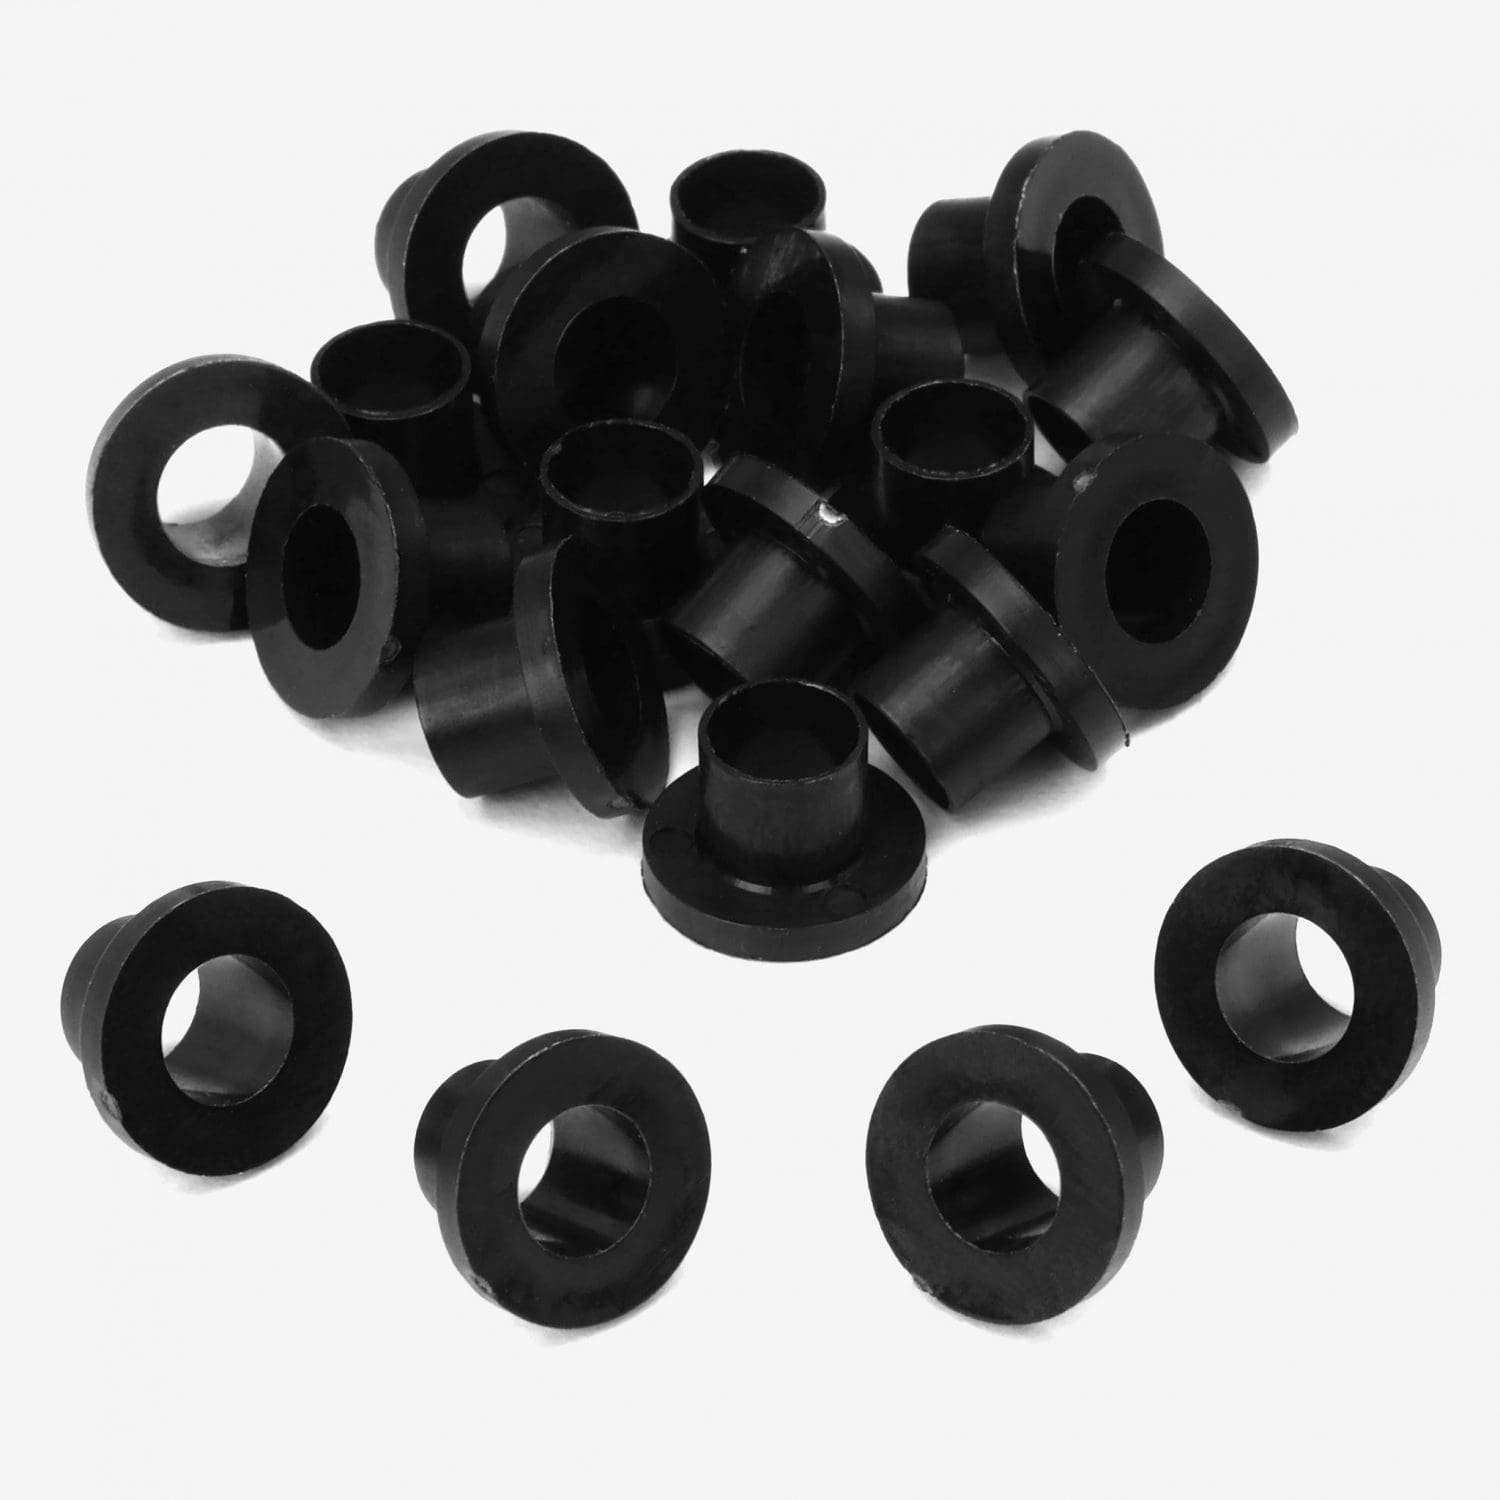 20 Pack Nylon Tension Rod Washers